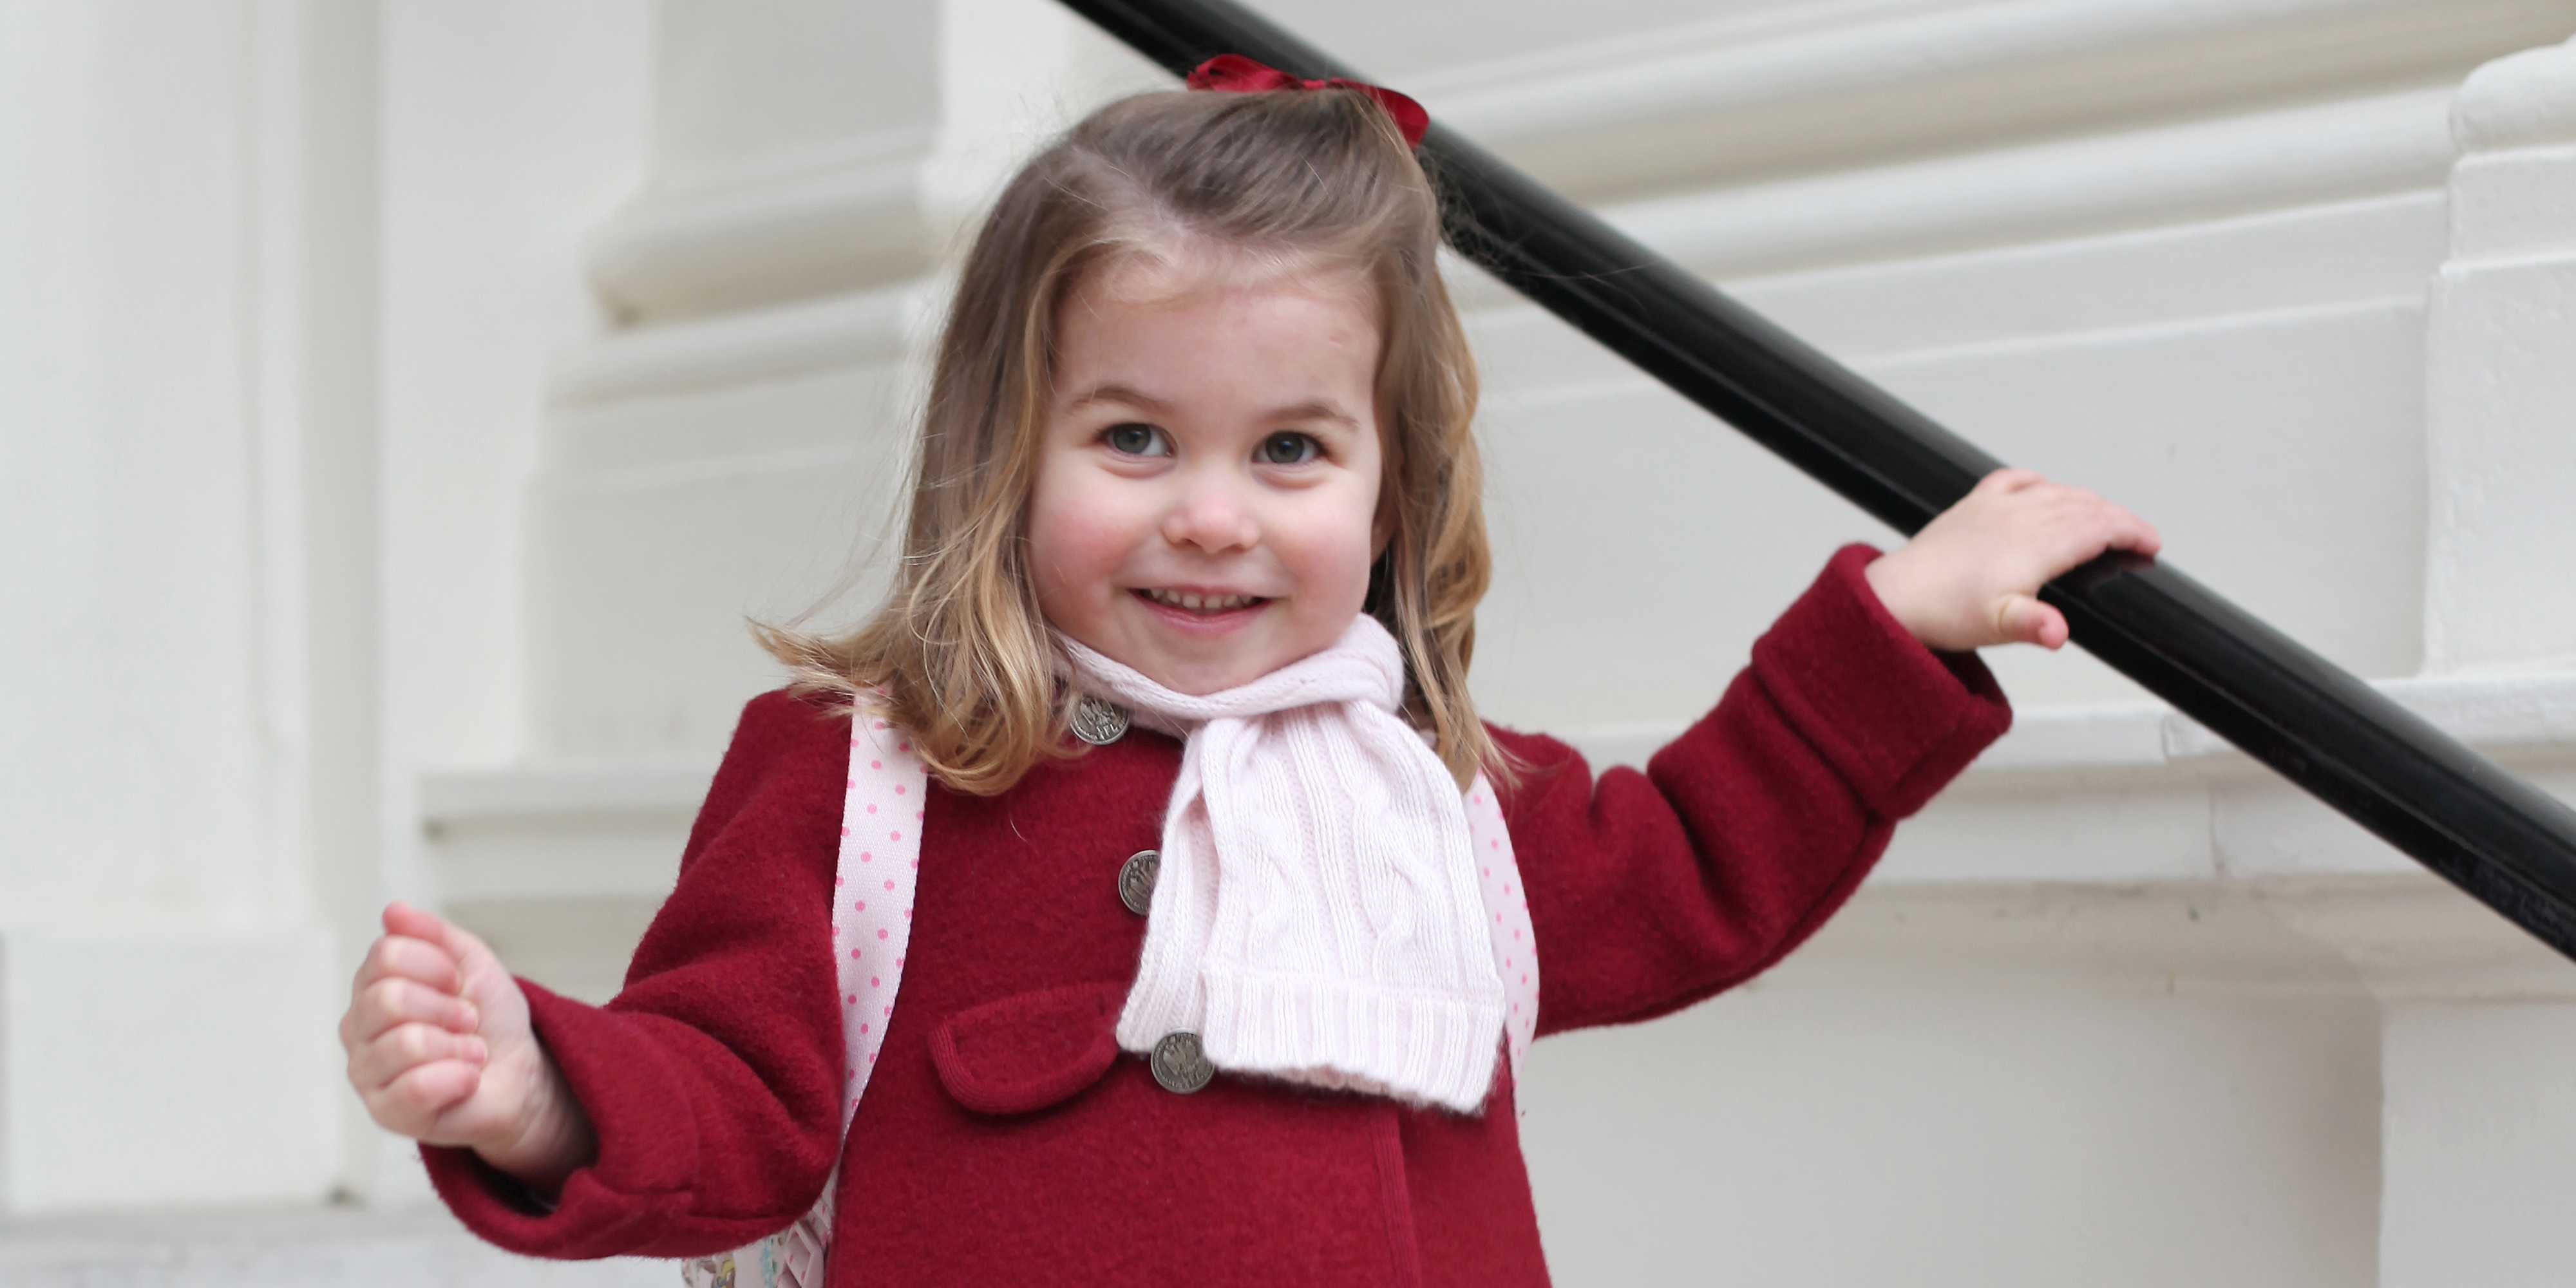 Princess Charlotte is beyond adorable on her first day of nursery school